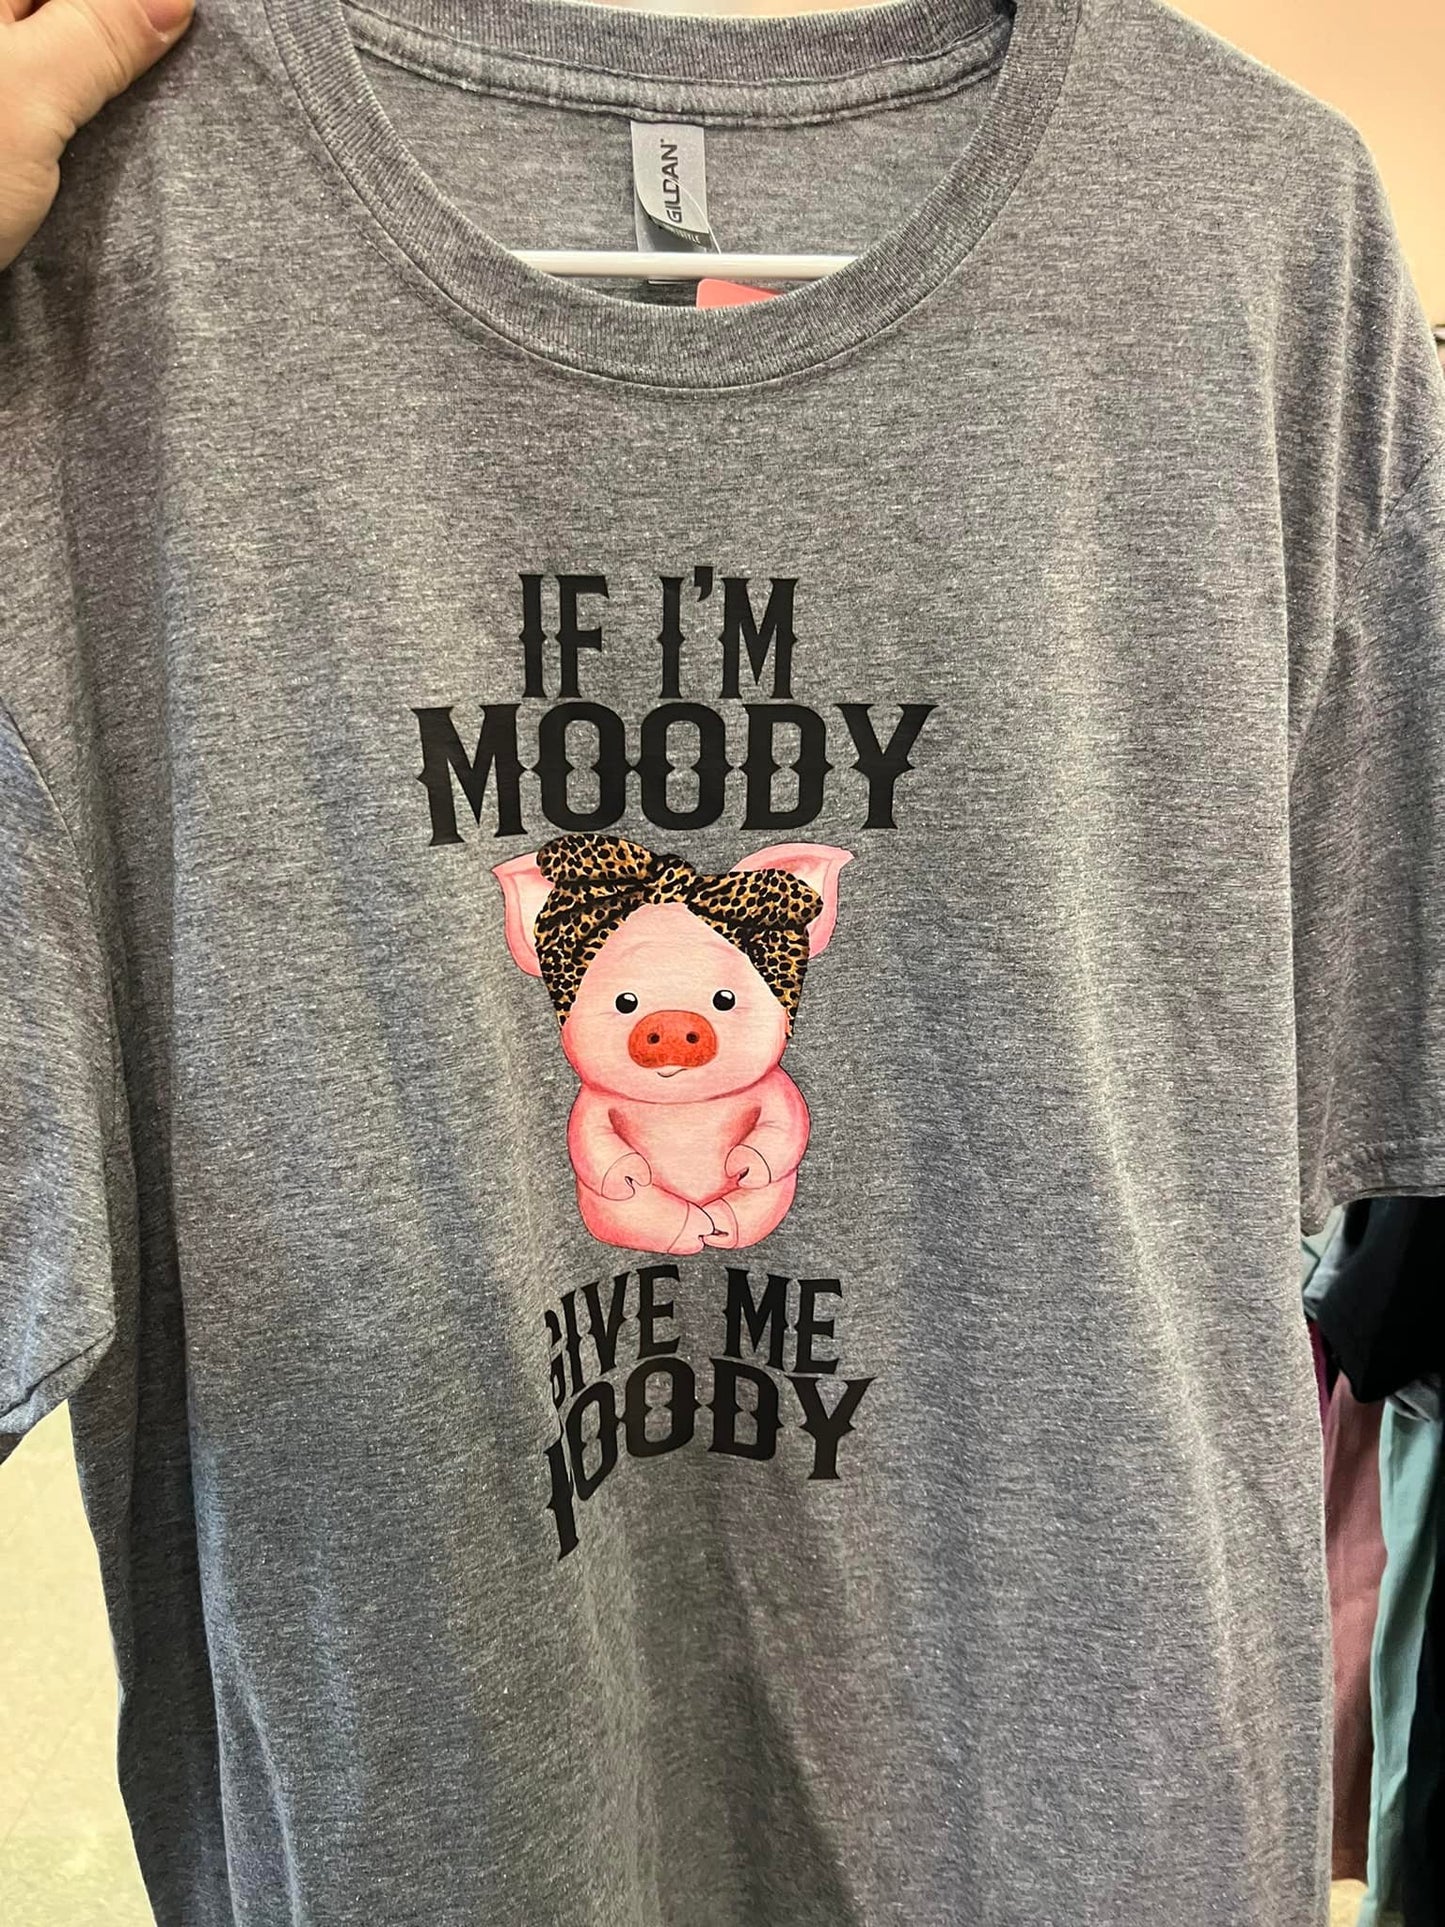 IF IM MOODY GIVE ME FOODY T-SHIRT